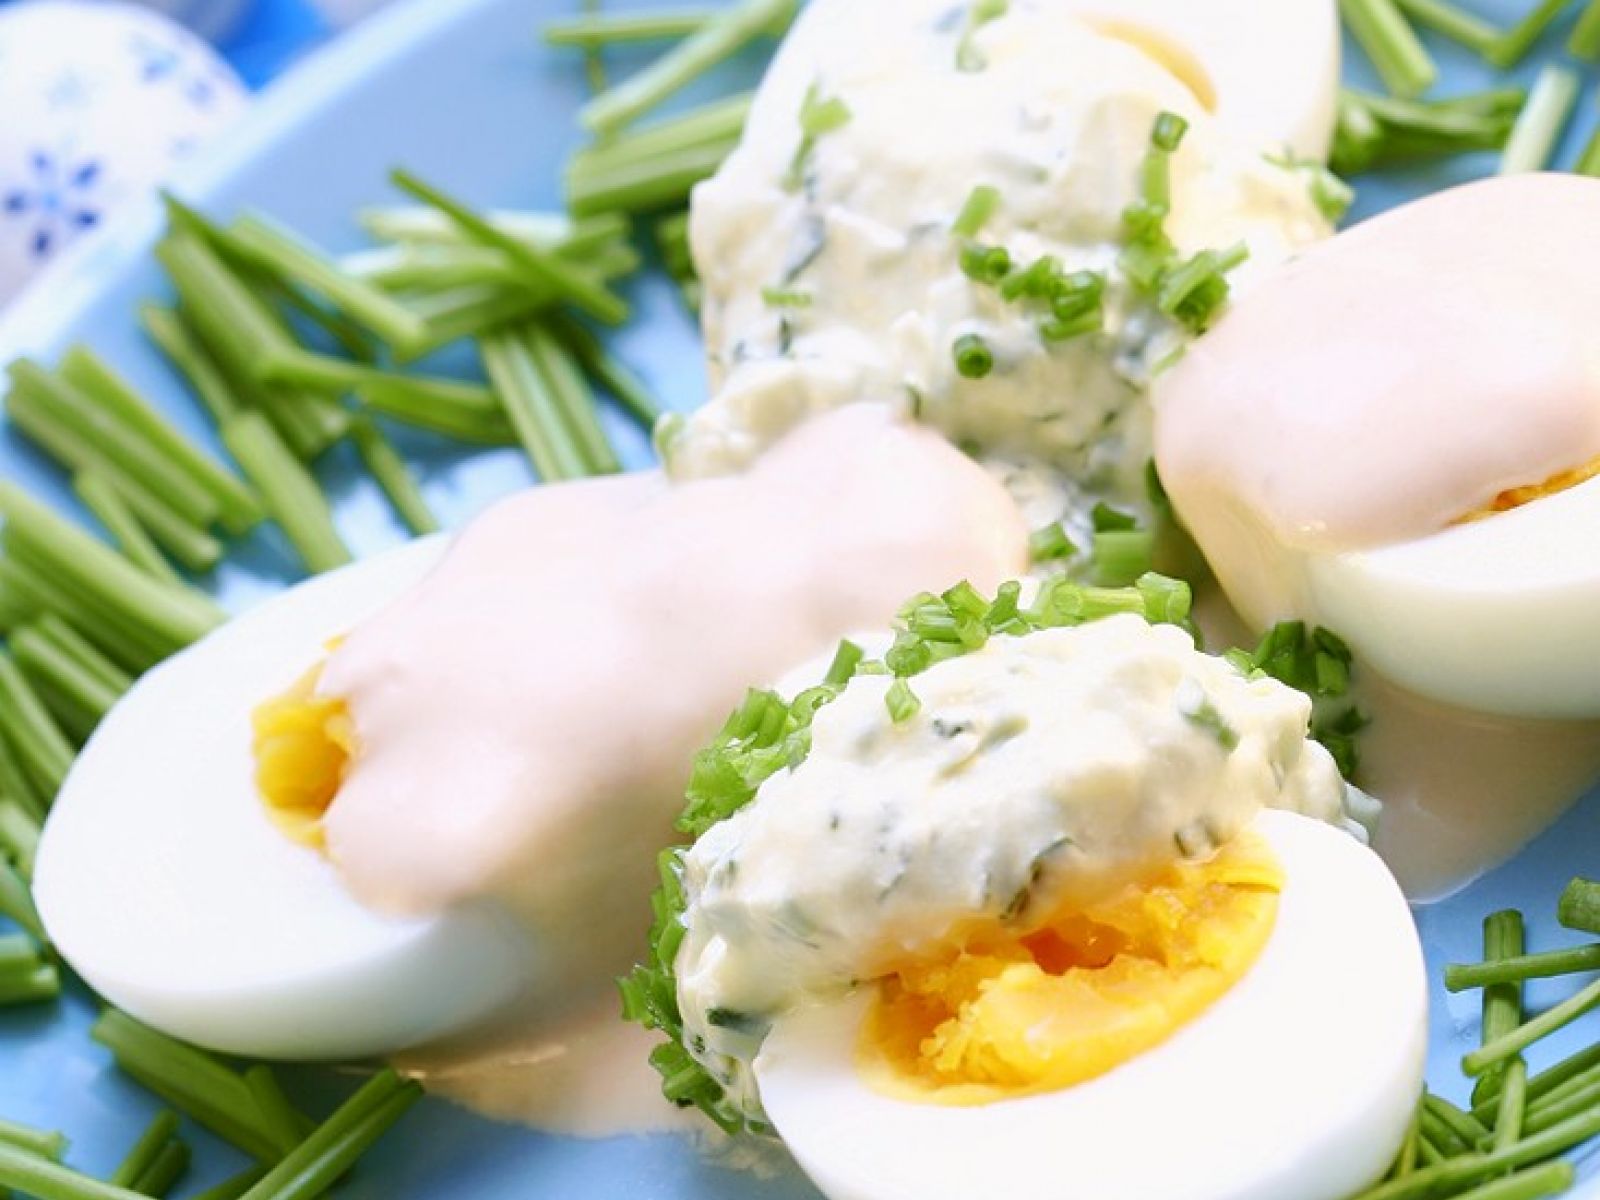 How Many of These Foods Would You Eat With Mayonnaise? Eggs With Mayonnaise